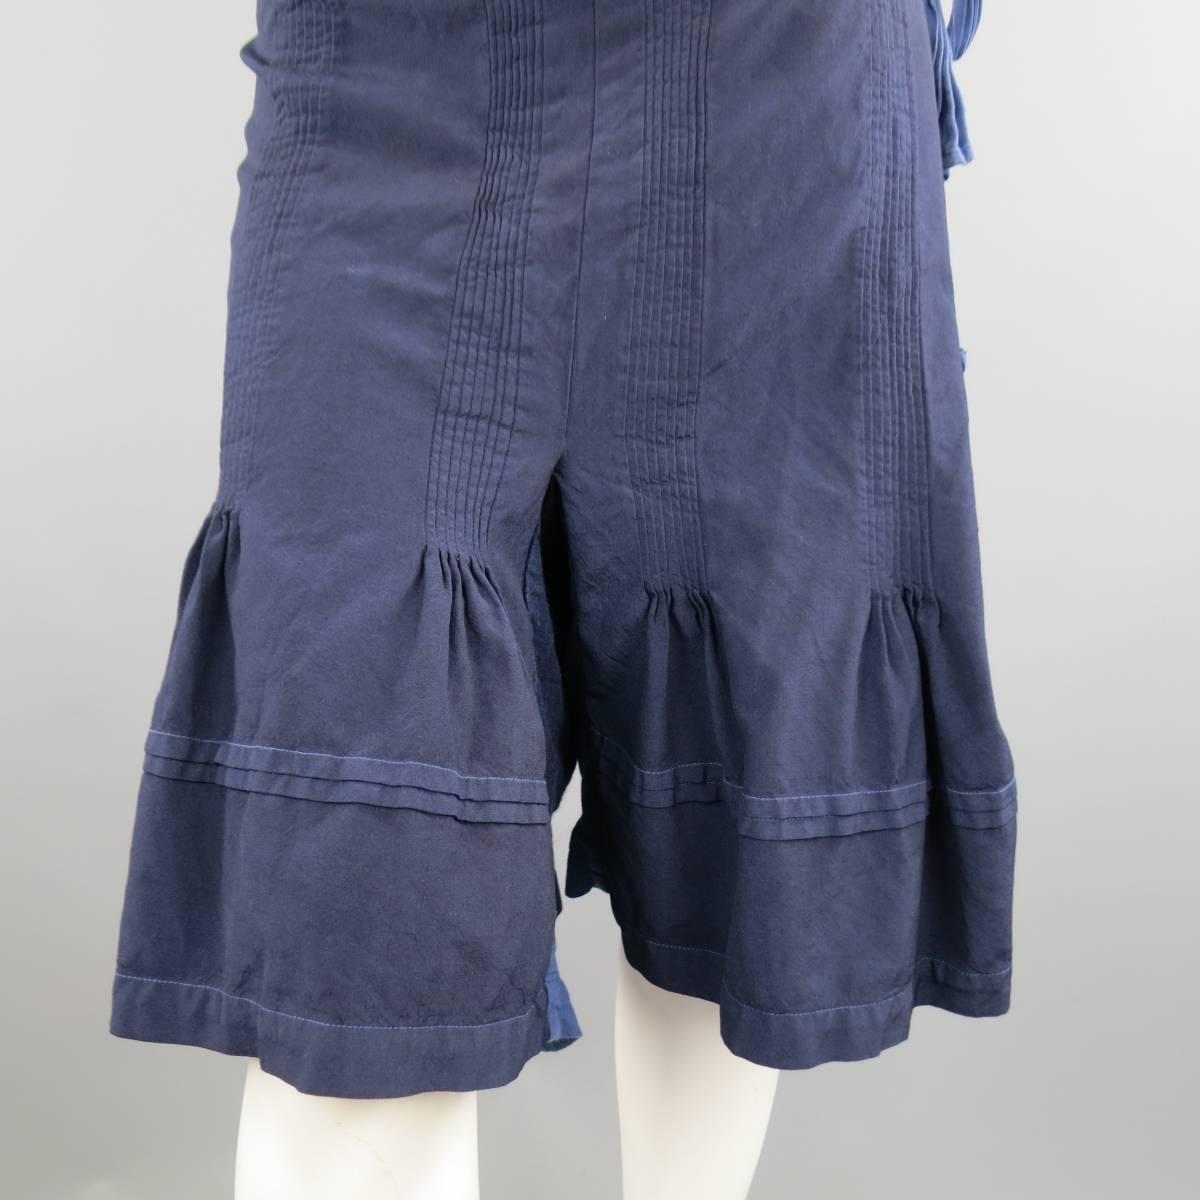 TAO KURIHARA / COMME DES GARCONS navy polyester drop-crotch pants feature a 'thai-style fisherman pant' with adjustable inside button closure, and wrap around tie. Single slit pocket. Gathered ruffle pleating detail throughout. Made in Japan.
 
Good